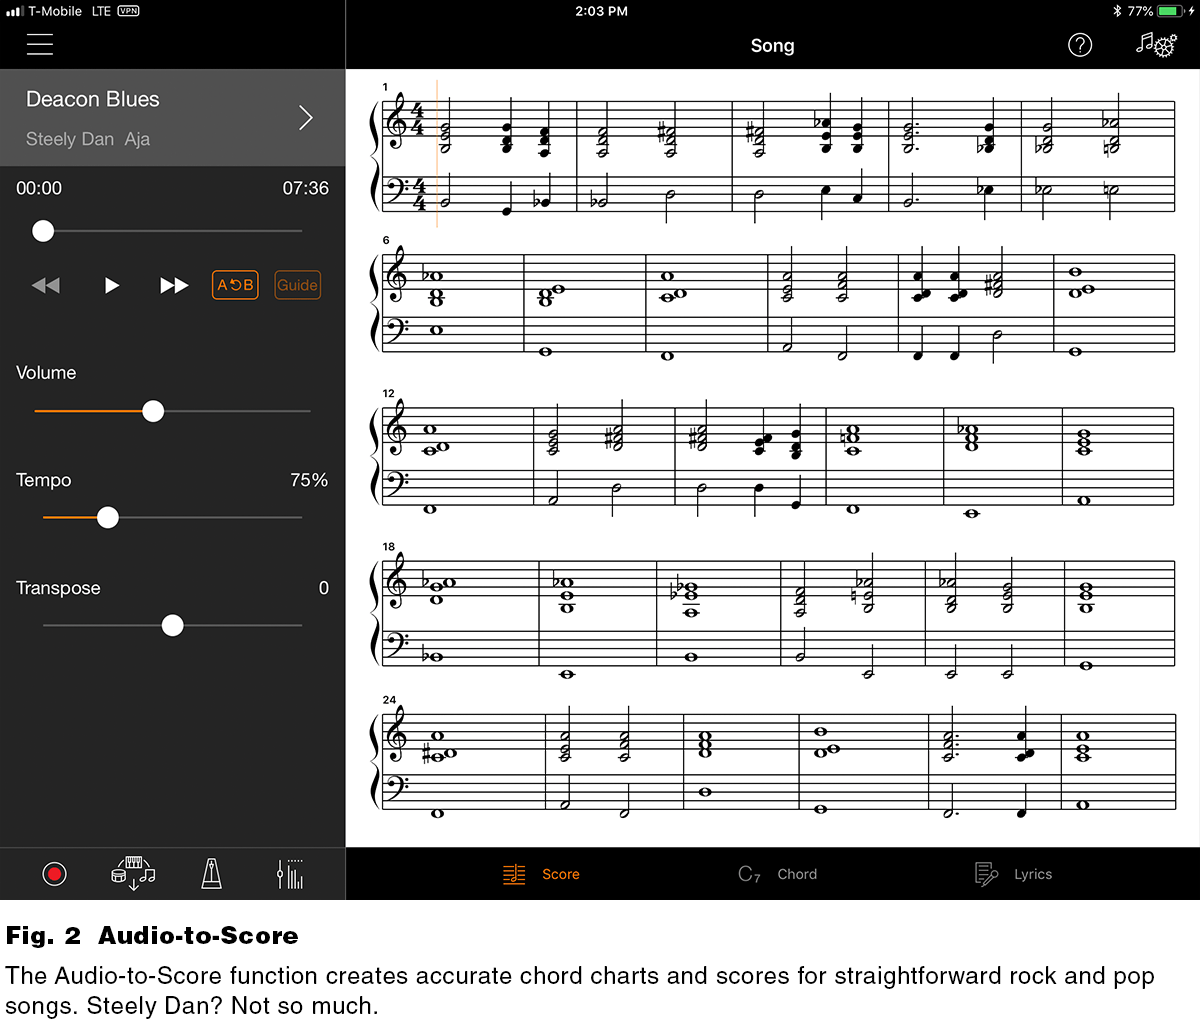 Fig. 2. The Audio-to-Score function creates accurate chord charts and scores for straightforward rock and pop songs. Steely Dan? Not so much.